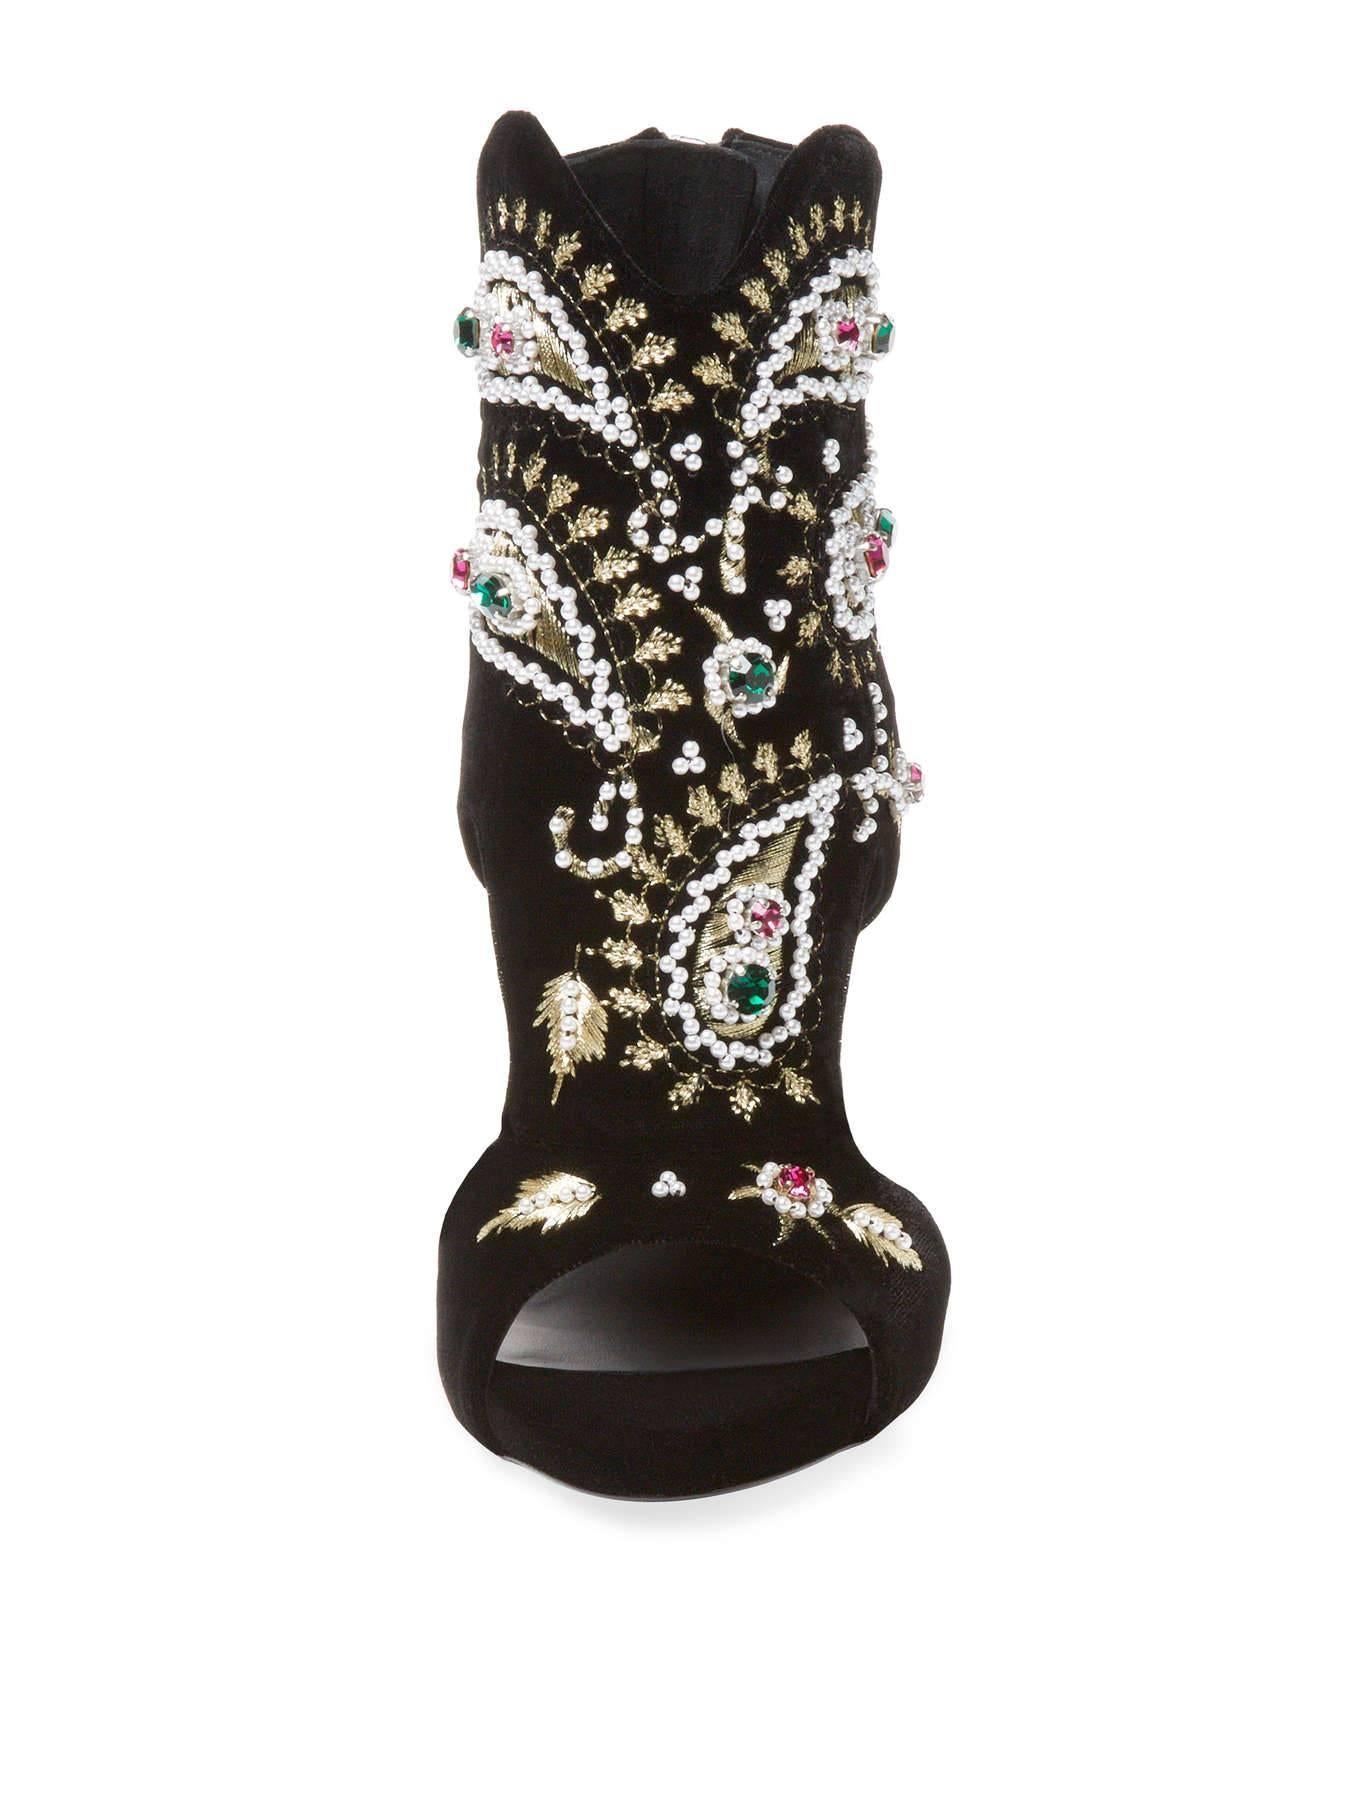 CURATOR'S NOTES

AMAZING price reduction for a limited only!

Size IT 36
Velvet
Bead
Rhinestone
Zip closure
Made in Italy
Heel height 4.75